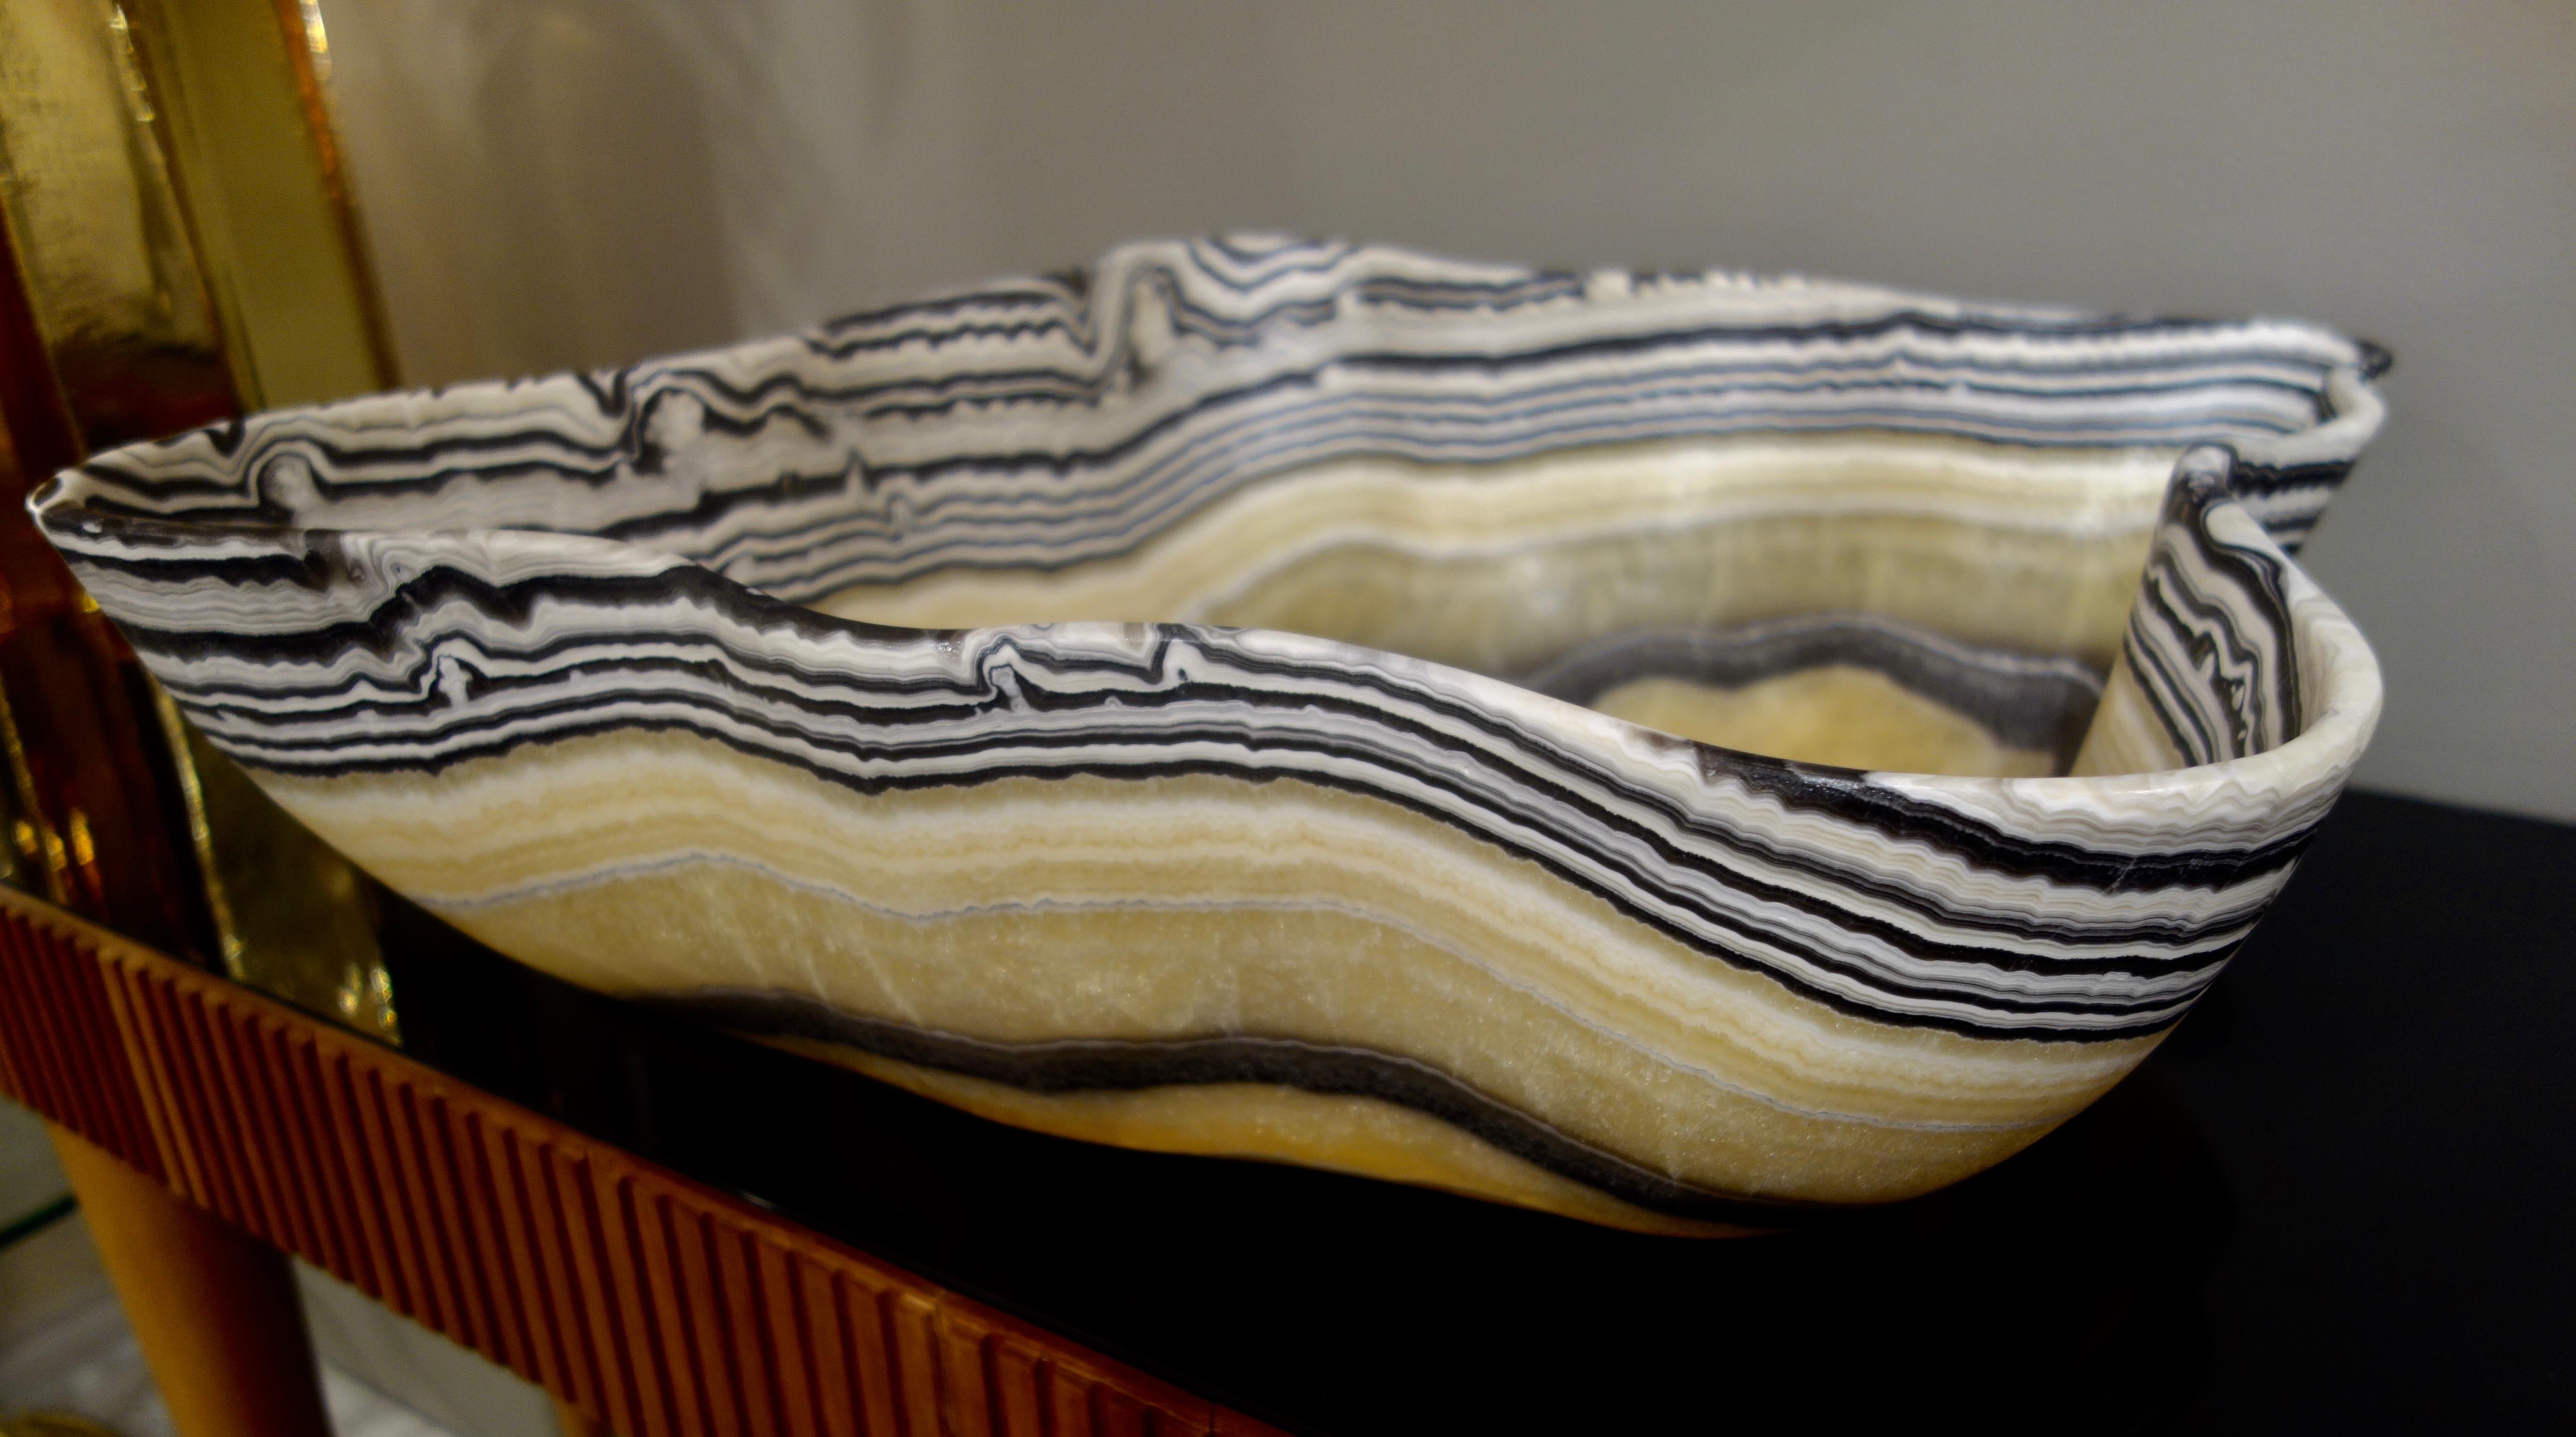 A large hand carved onyx bowl or centerpiece with zebra striped rim in shades of gold, charcoal gray and white with natural negative spaces.